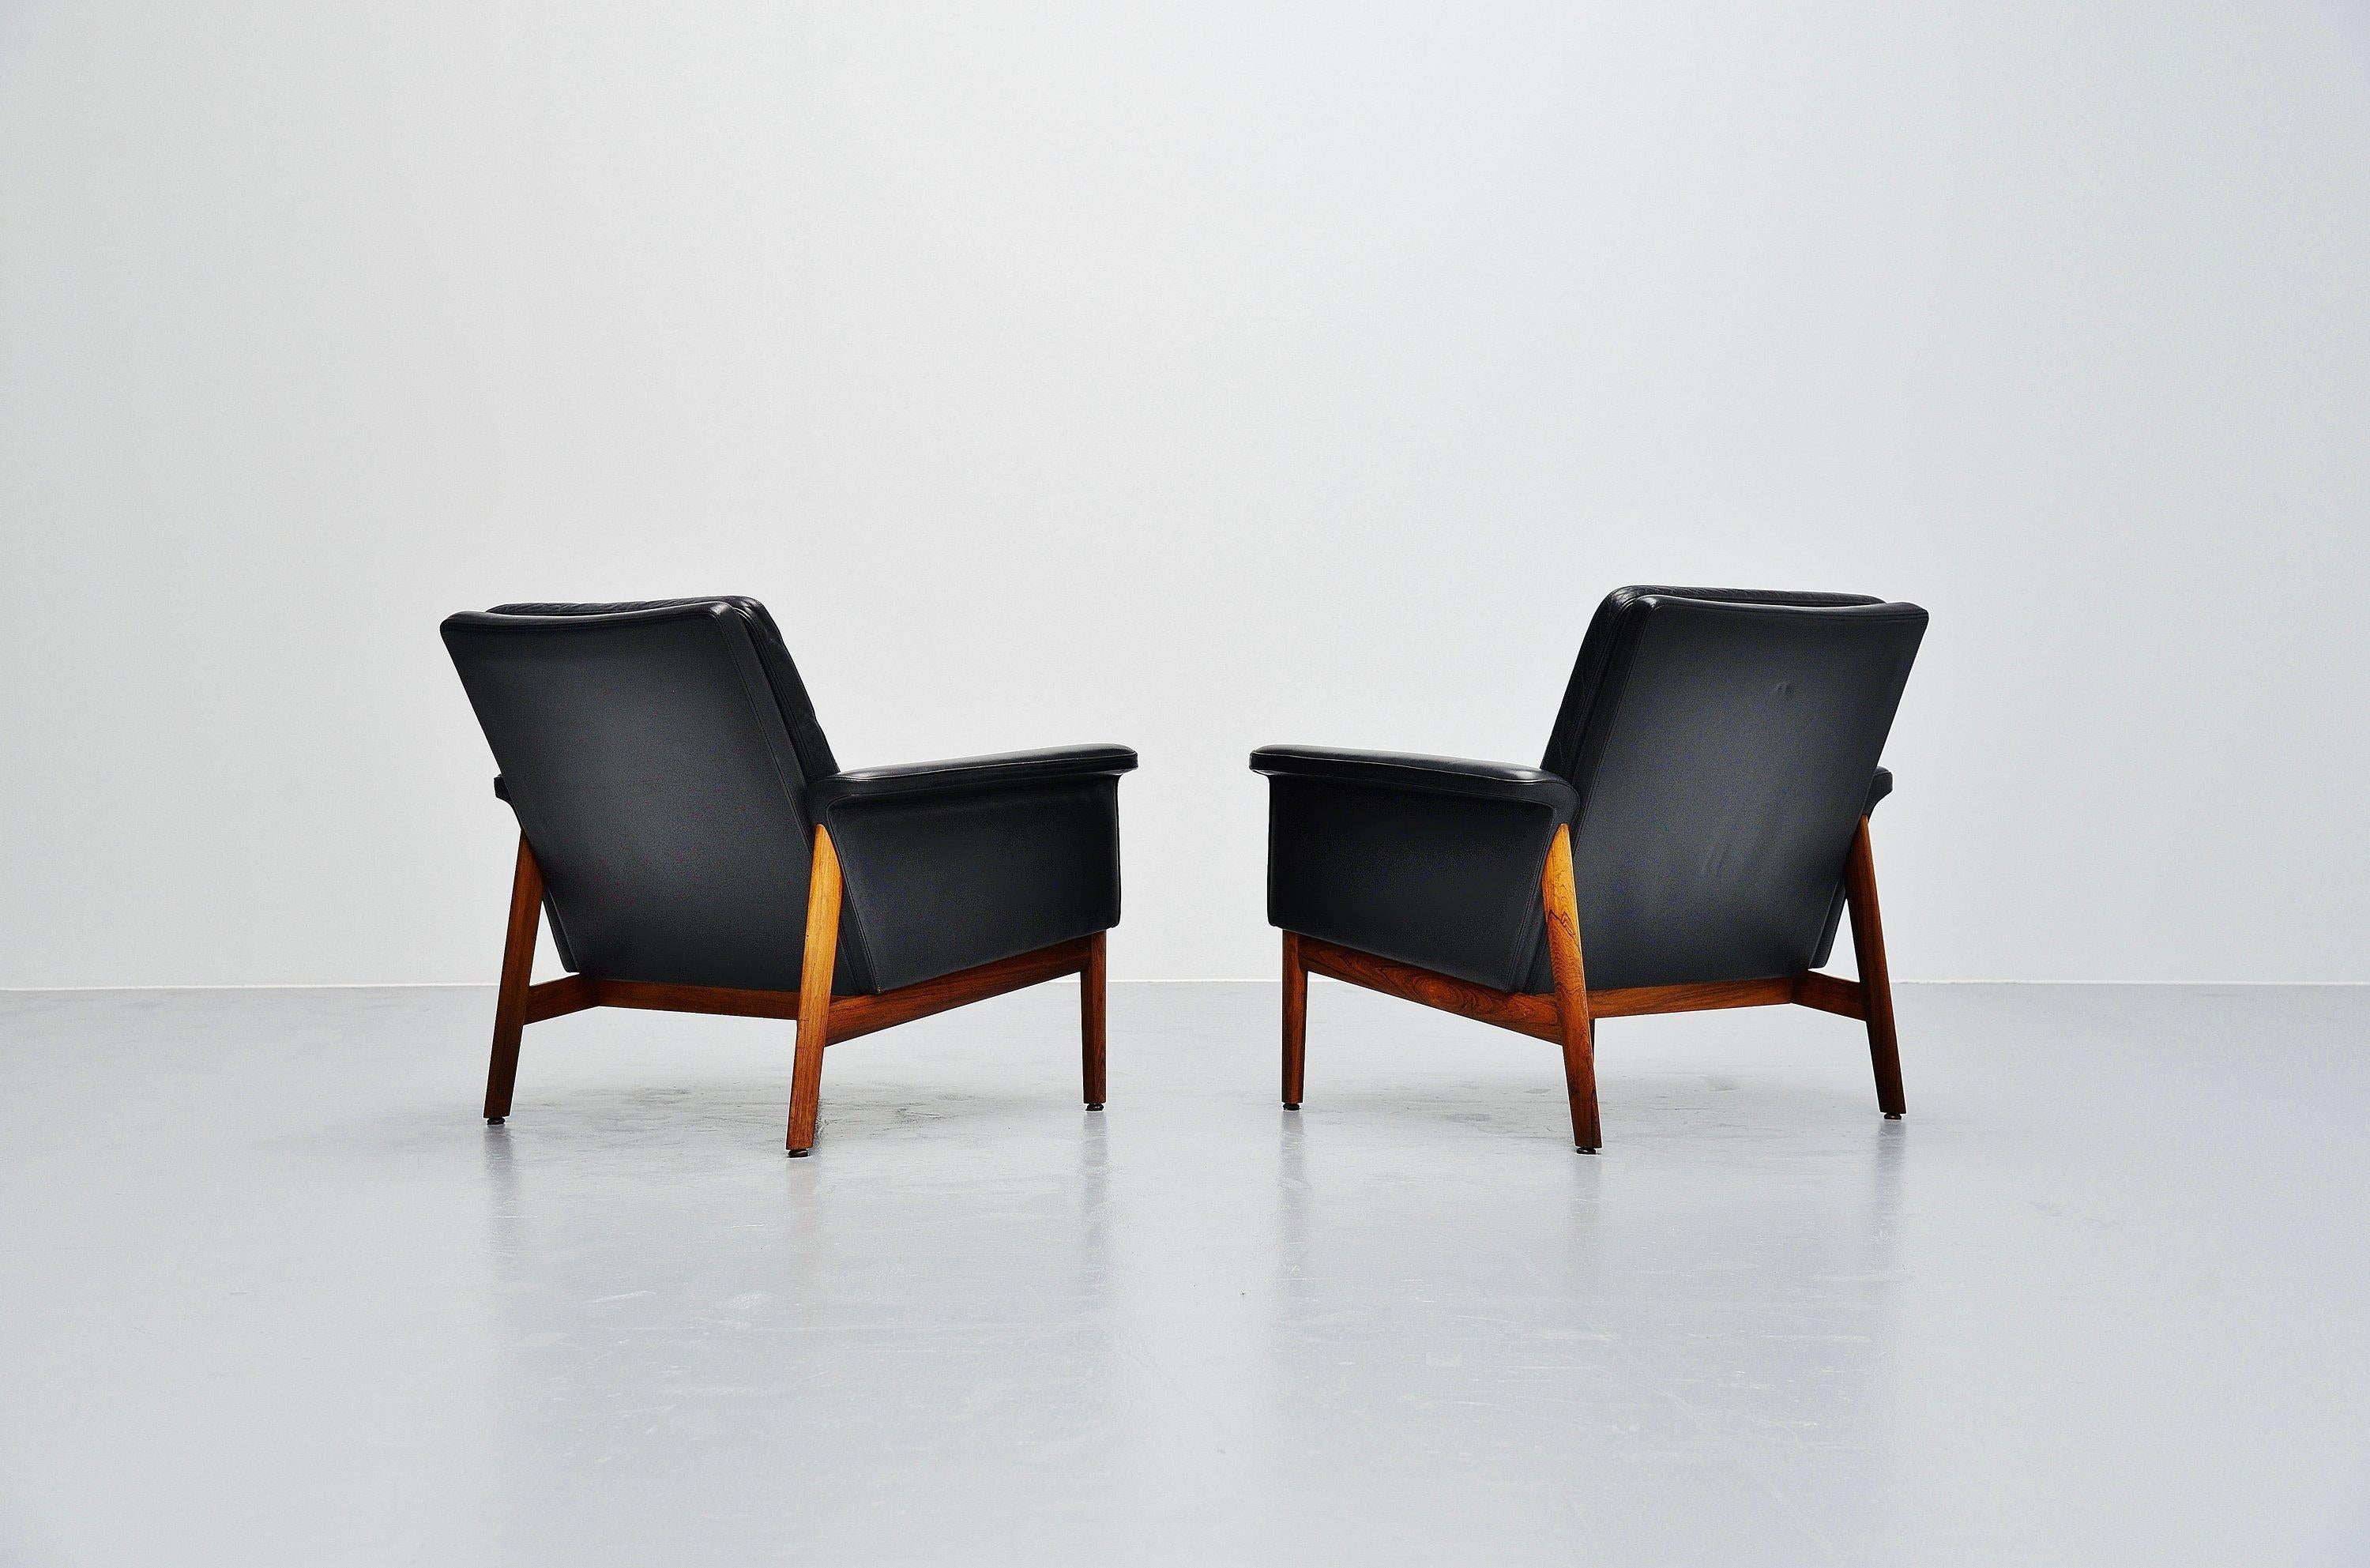 Danish modern so called Jupiter lounge chairs model 218 designed by Finn Juhl and manufactured by France & Son, Denmark, 1965. The lounge chairs have a solid rosewood frame and black leather seating. The sofa is in fully original and very good